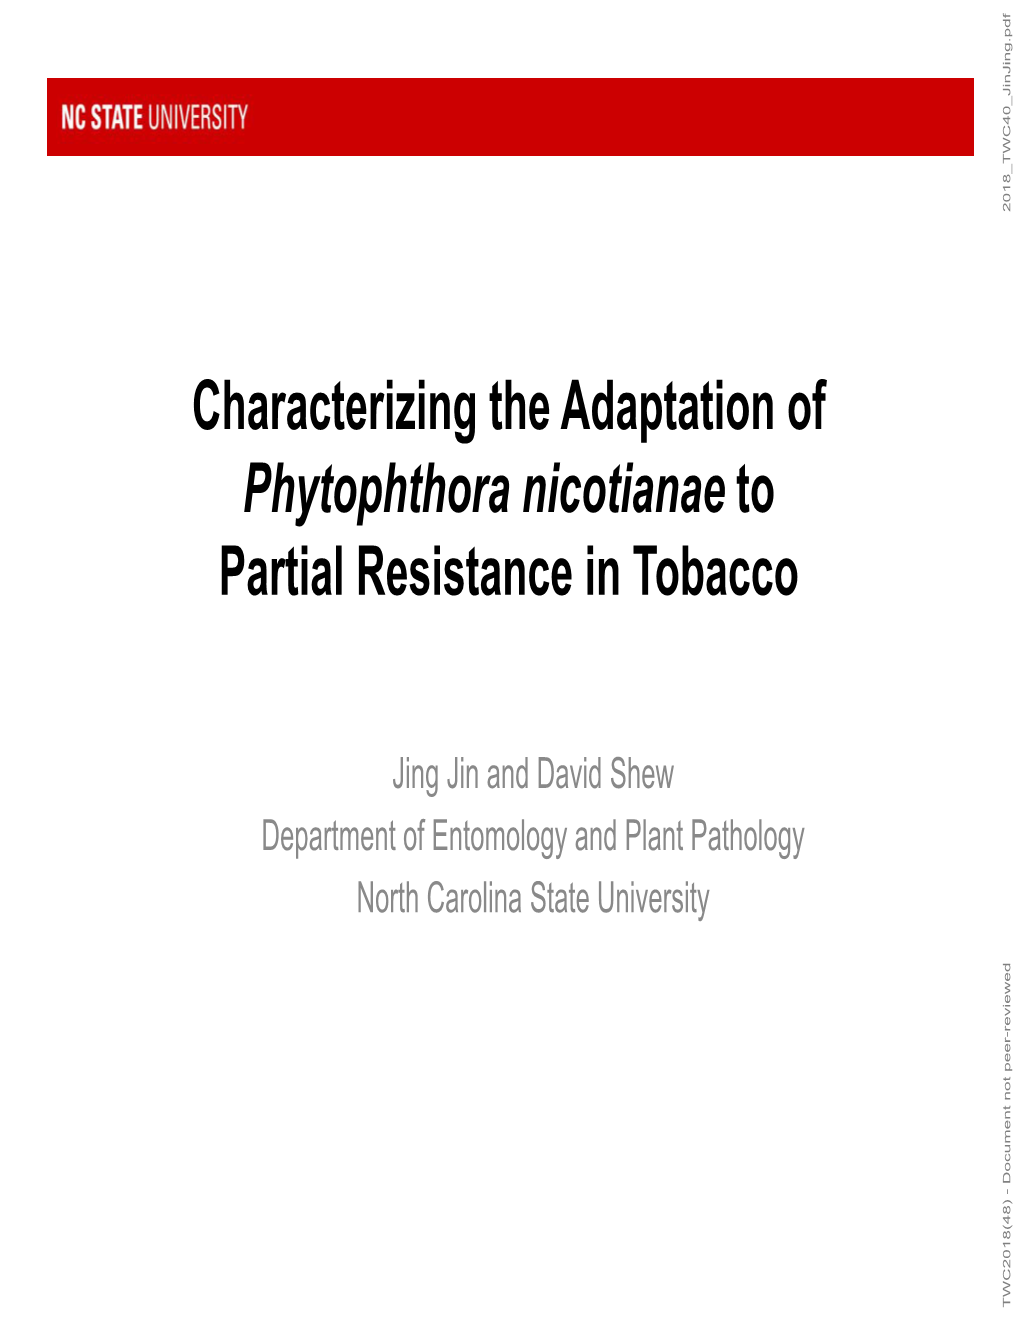 Characterizing the Adaptation of Phytophthora Nicotianae to Partial